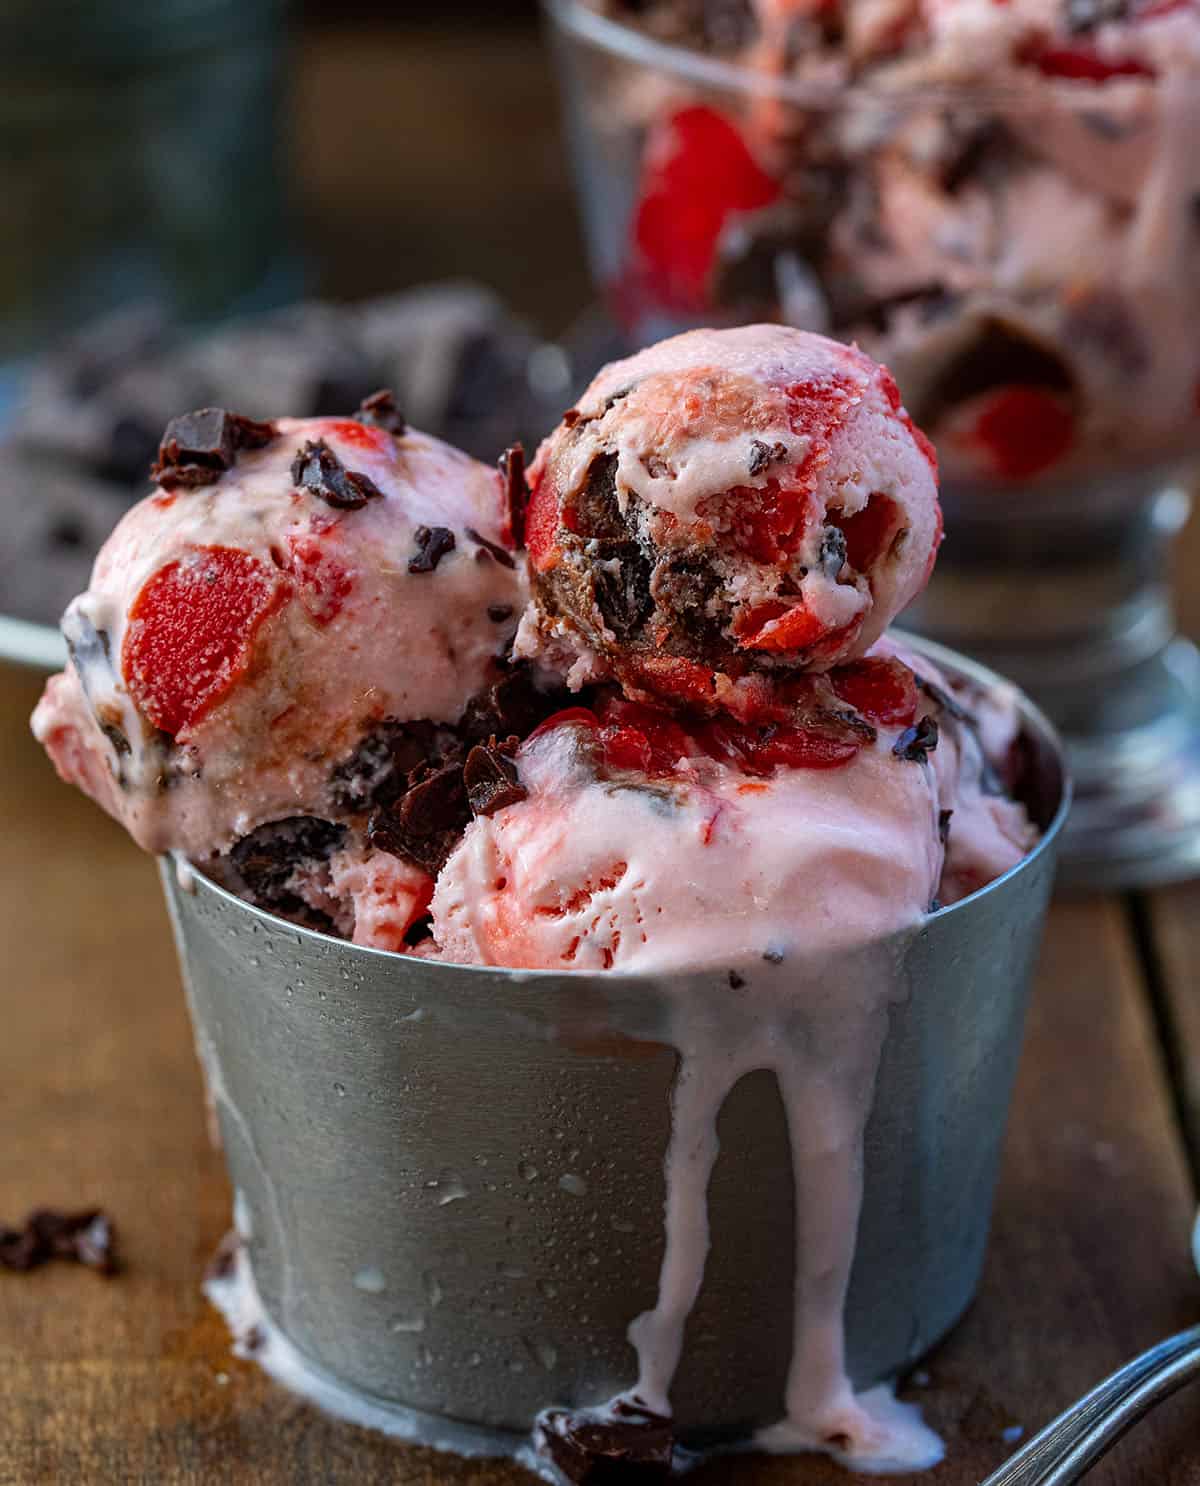 Cup of Chocolate Cherry Ice Cream that is melting on a wooden table.